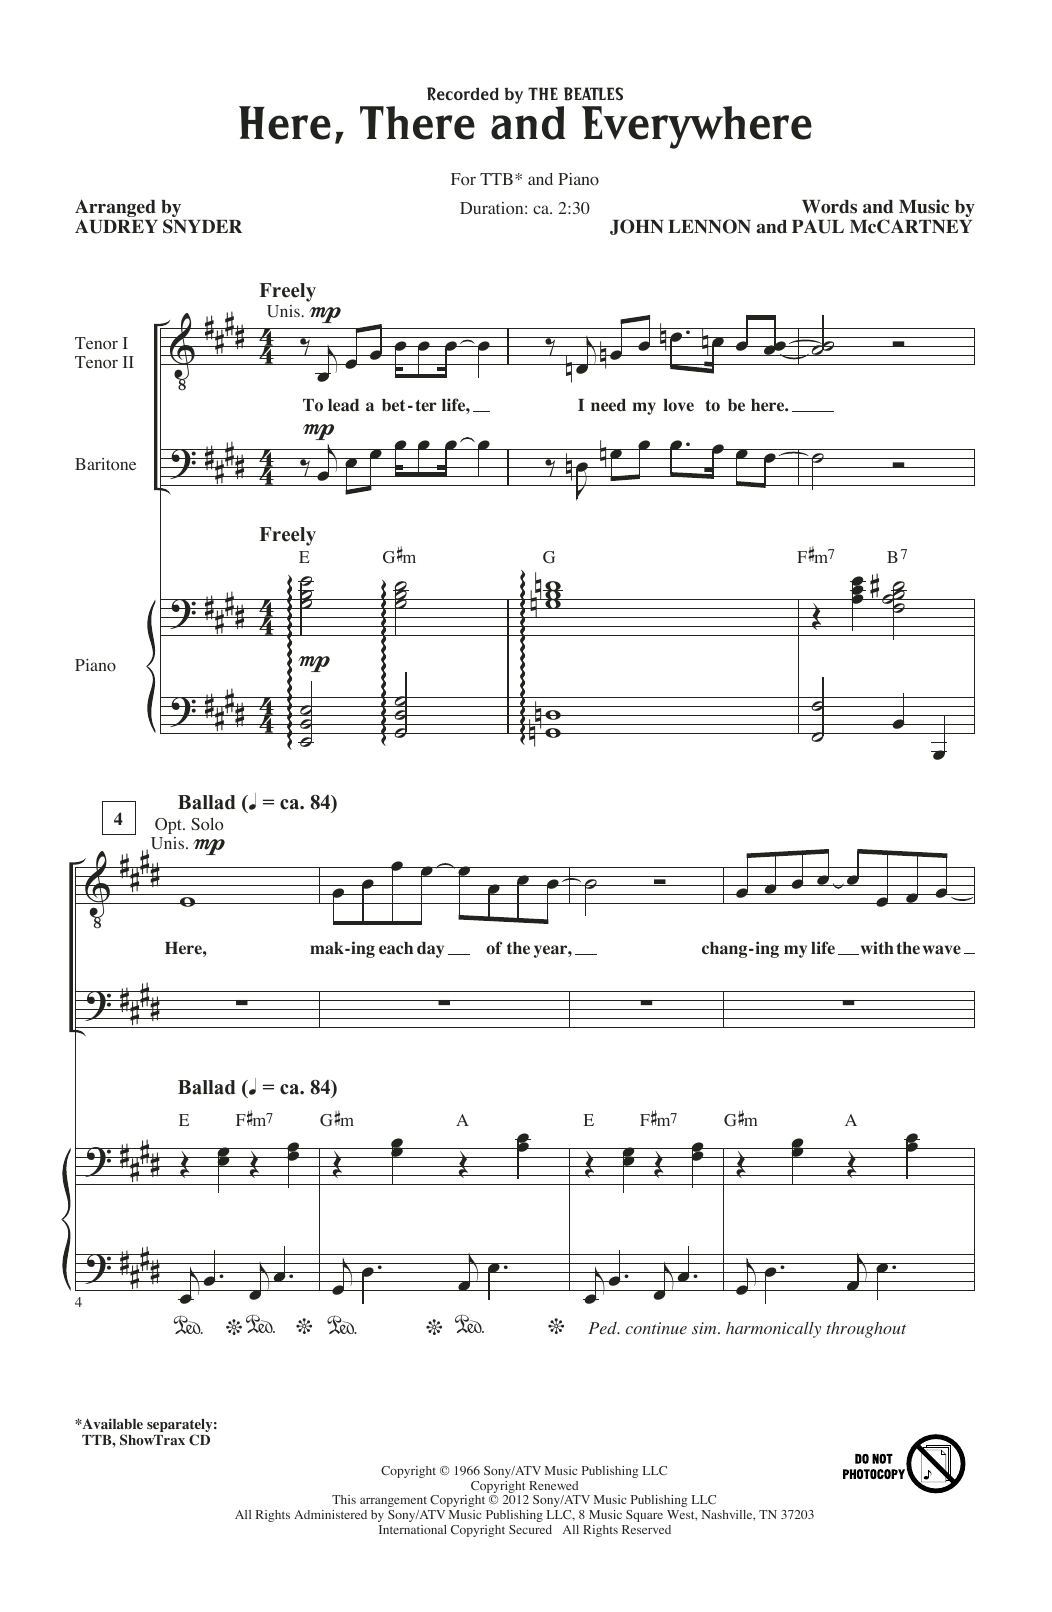 Download The Beatles Here, There And Everywhere (arr. Audrey Sheet Music